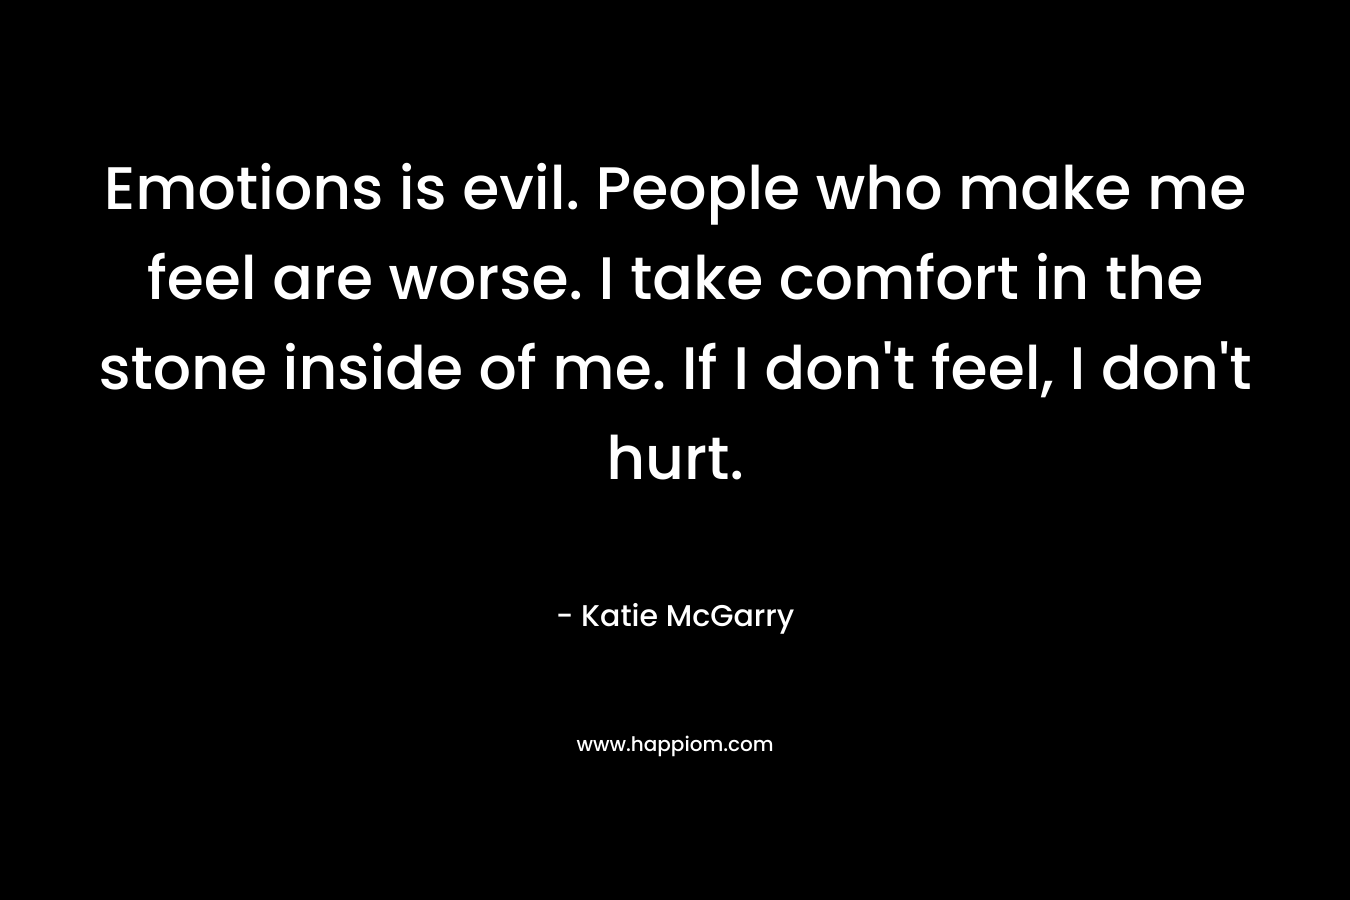 Emotions is evil. People who make me feel are worse. I take comfort in the stone inside of me. If I don’t feel, I don’t hurt. – Katie McGarry